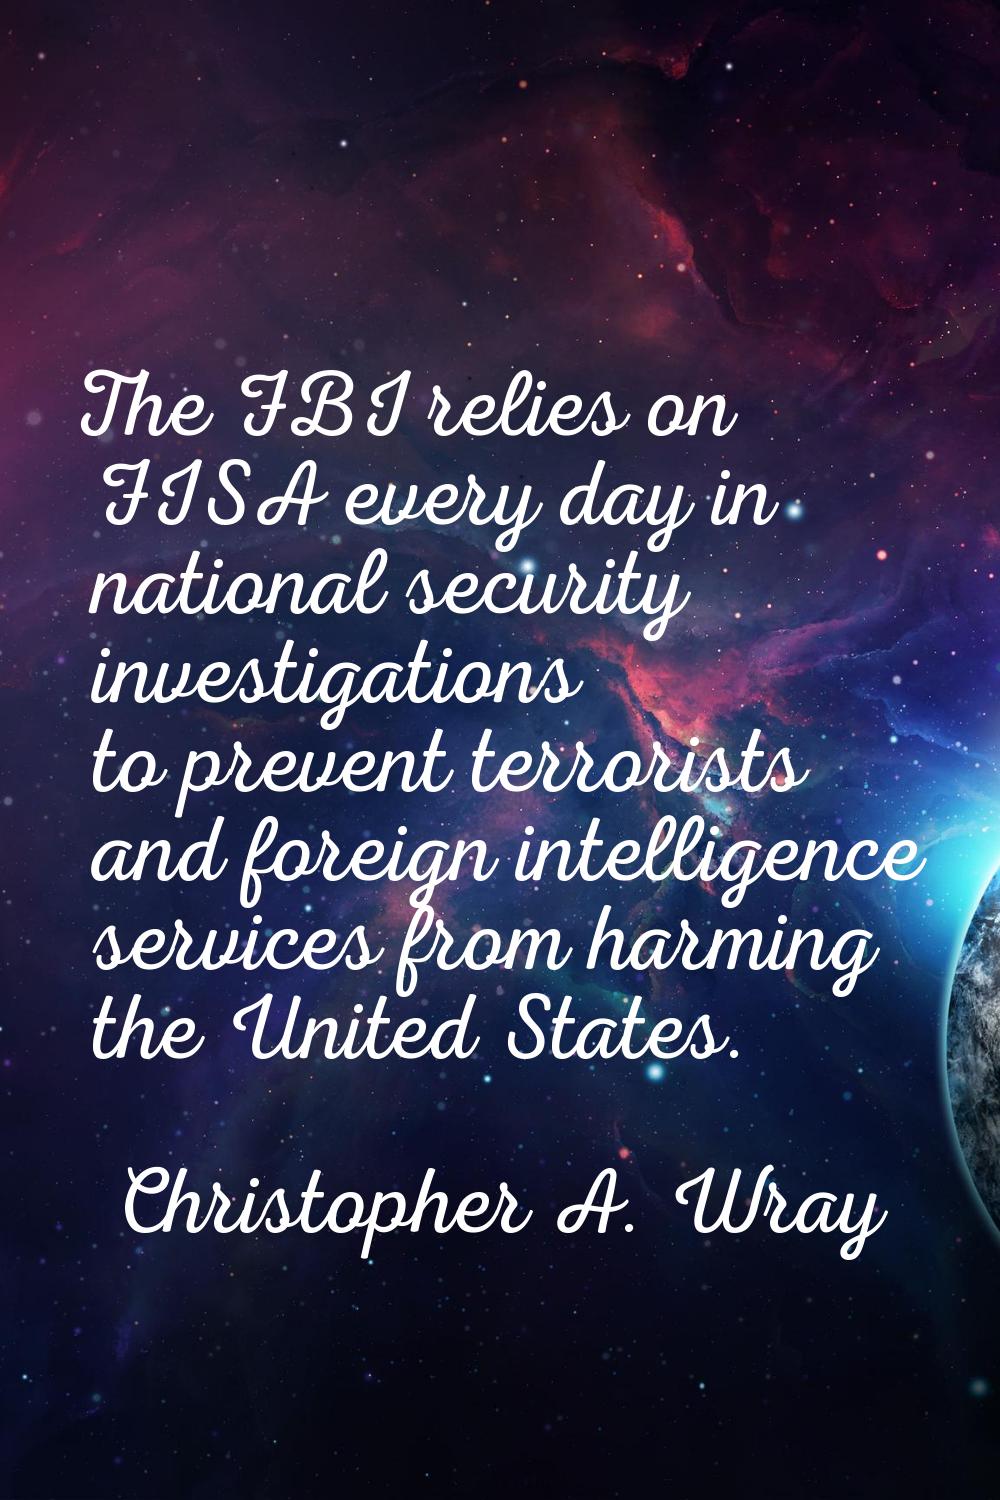 The FBI relies on FISA every day in national security investigations to prevent terrorists and fore